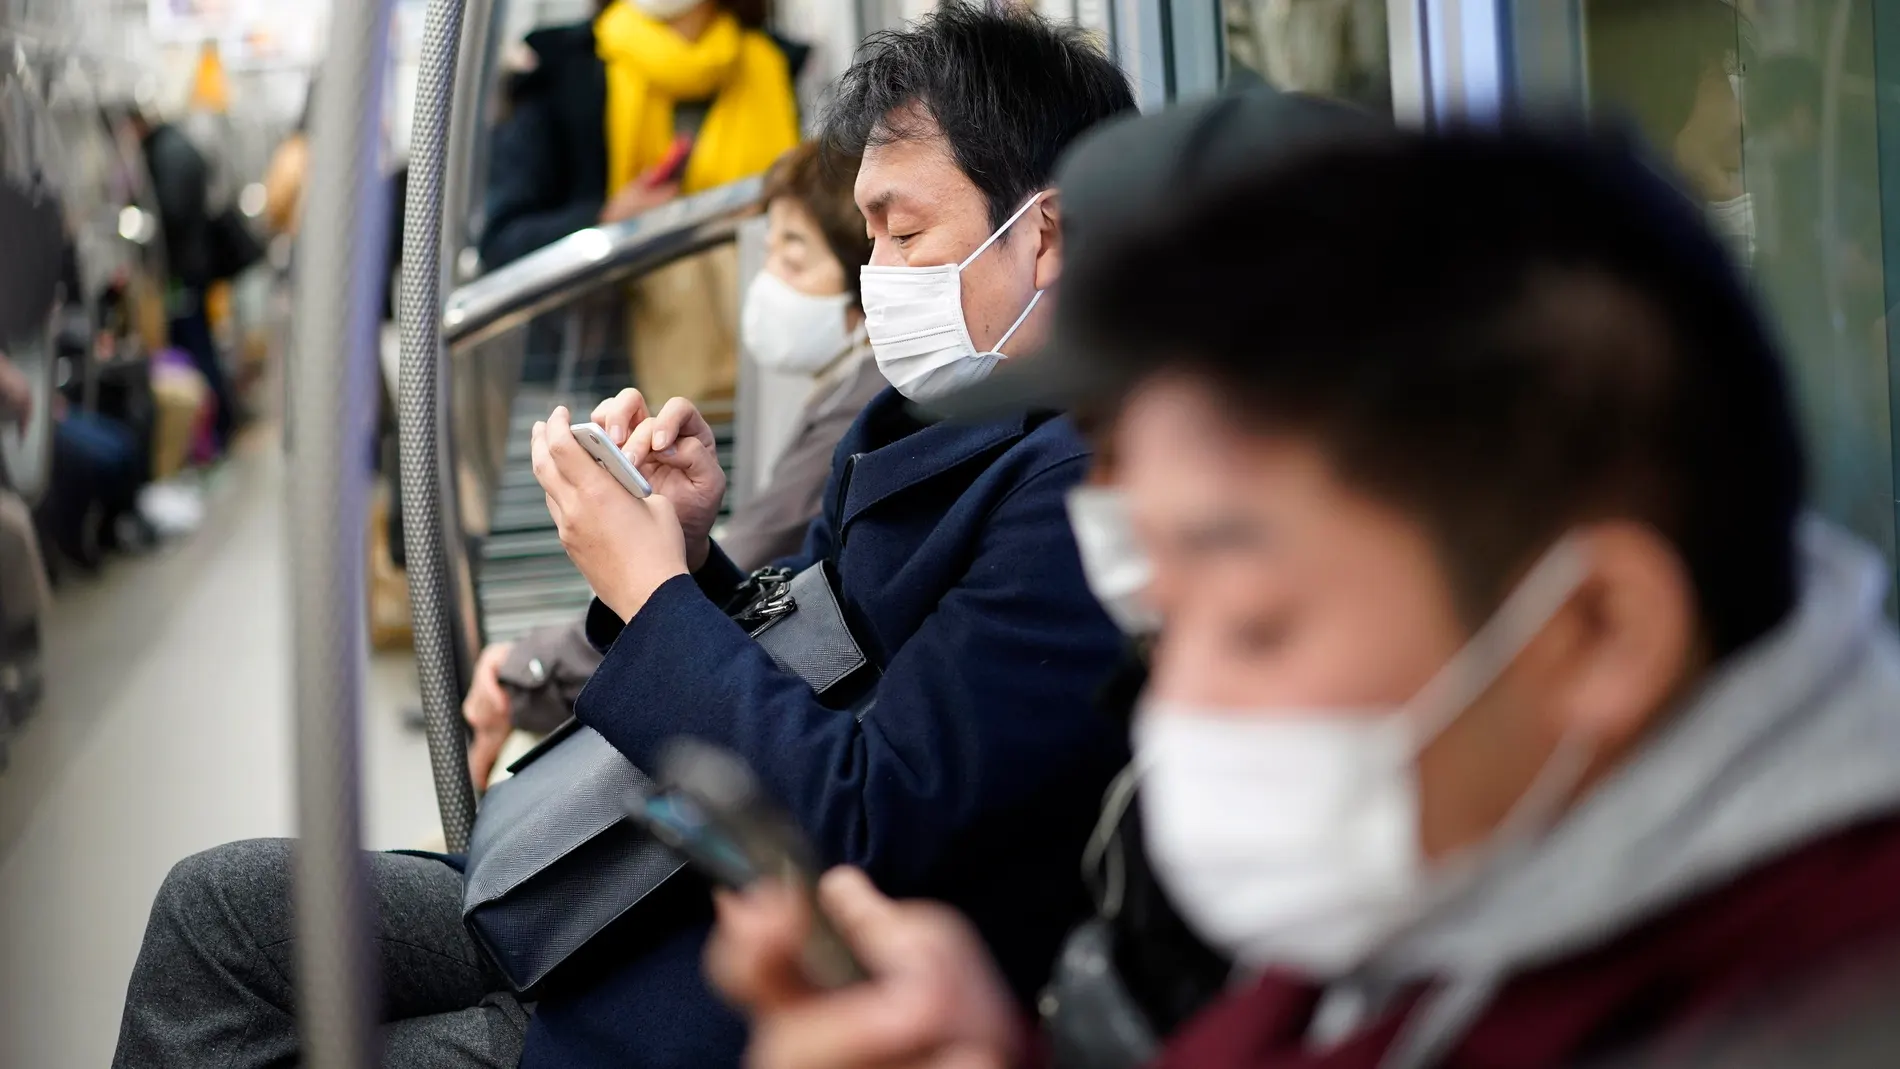 Tokyo (Japan), 06/01/2021.- Commuters wearing face masks sit in a subway coach in Tokyo, Japan, 06 January 2021. The Tokyo Metropolitan Government announced that it has confirmed over 1,500 new coronavirus infections in Tokyo, a new record figure. Following the surge in cases number, the government is considering declaring a state of emergency in Tokyo and three surrounding prefectures. (Japón, Tokio) EFE/EPA/FRANCK ROBICHON